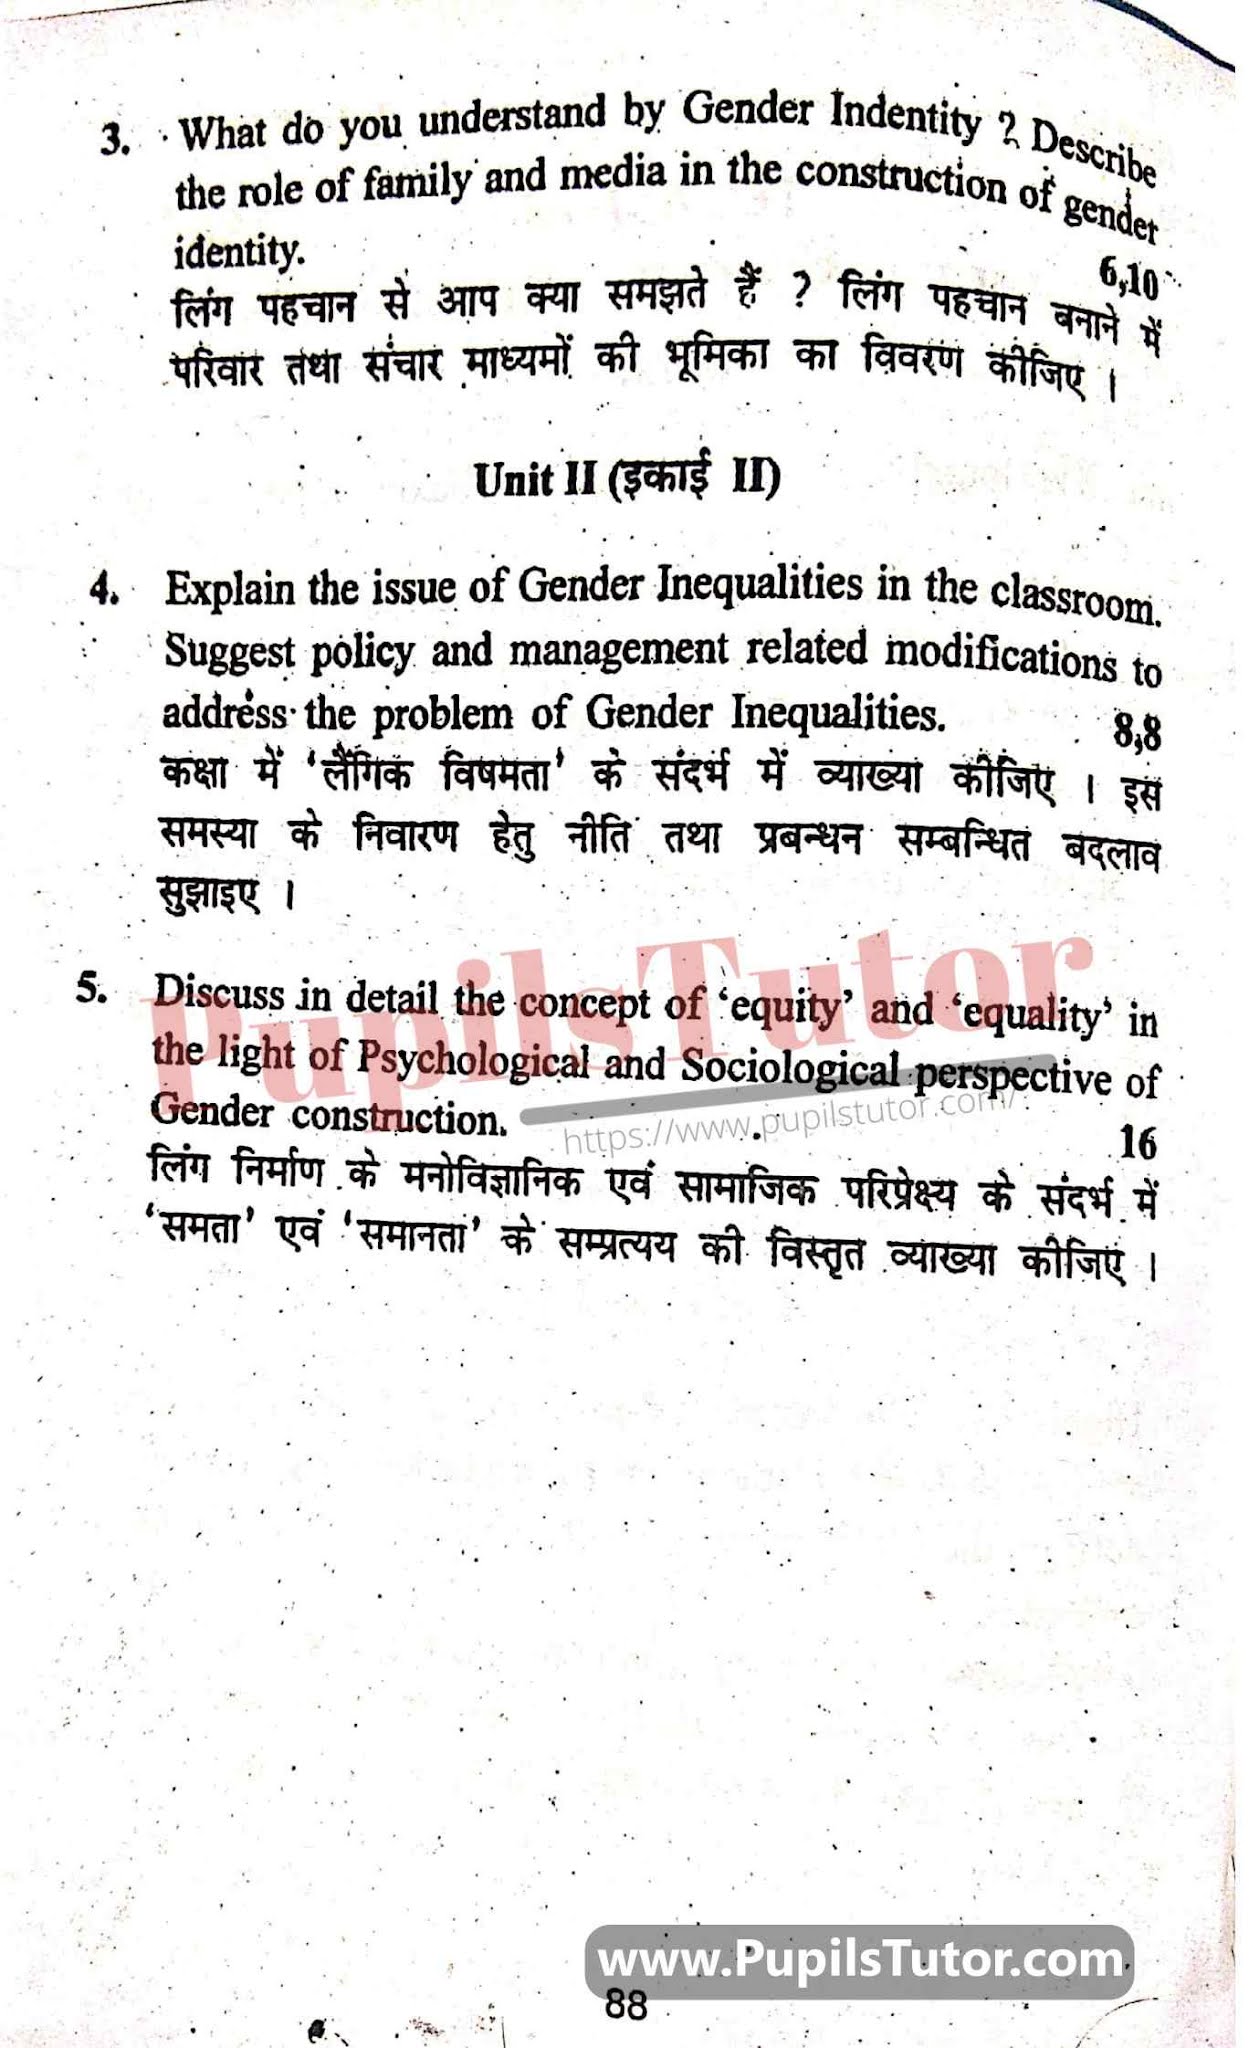 KUK (Kurukshetra University, Haryana) Gender School And Society Question Paper 2019 For B.Ed 1st And 2nd Year And All The 4 Semesters In English And Hindi Medium Free Download PDF - Page 2 - www.pupilstutor.com